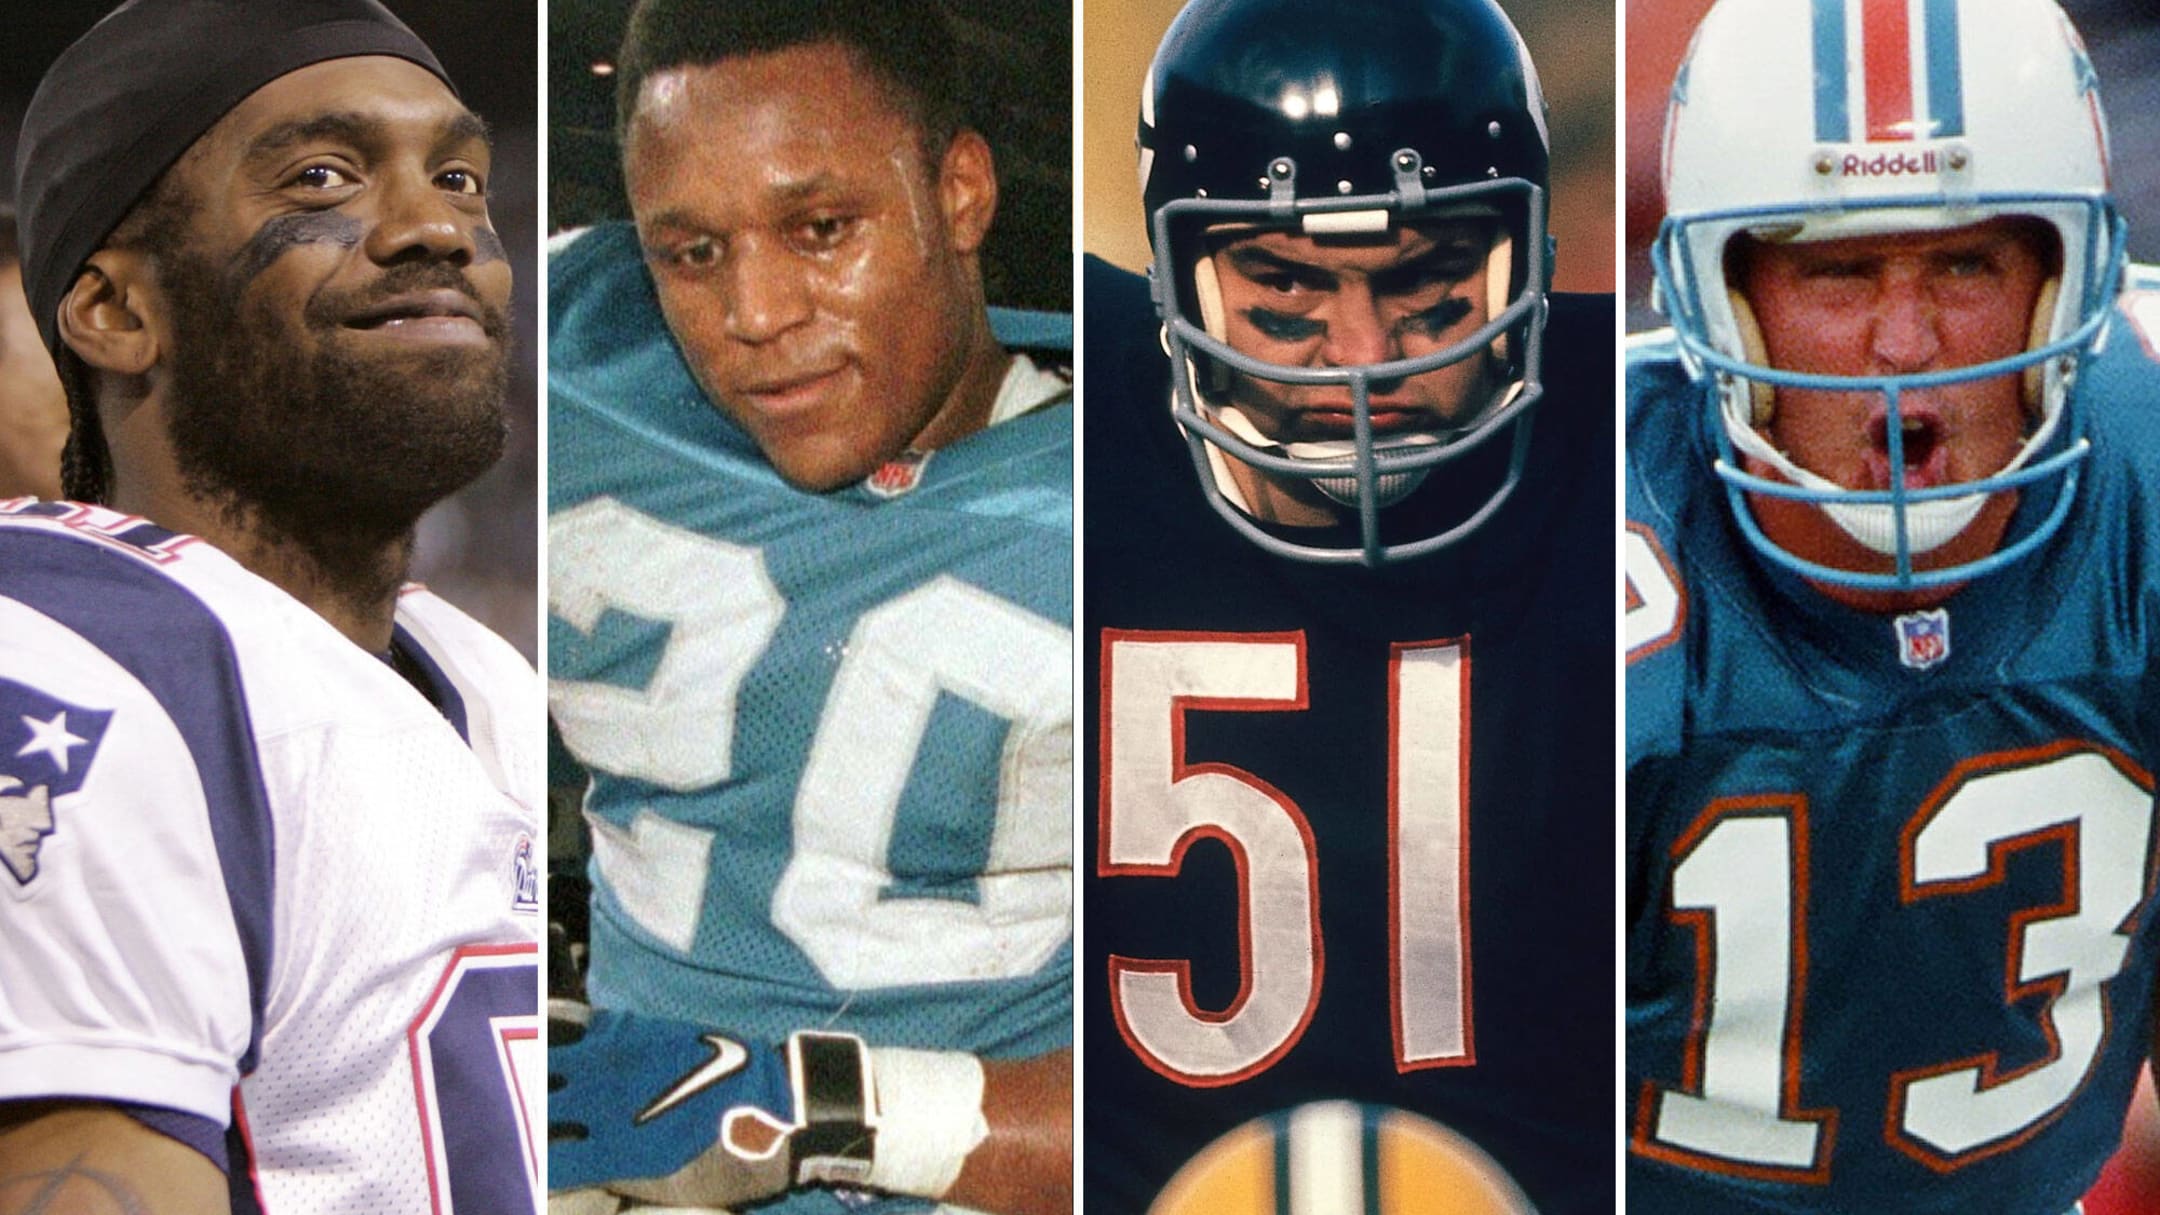 List: Athletes who played in NFL and MLB since 1980